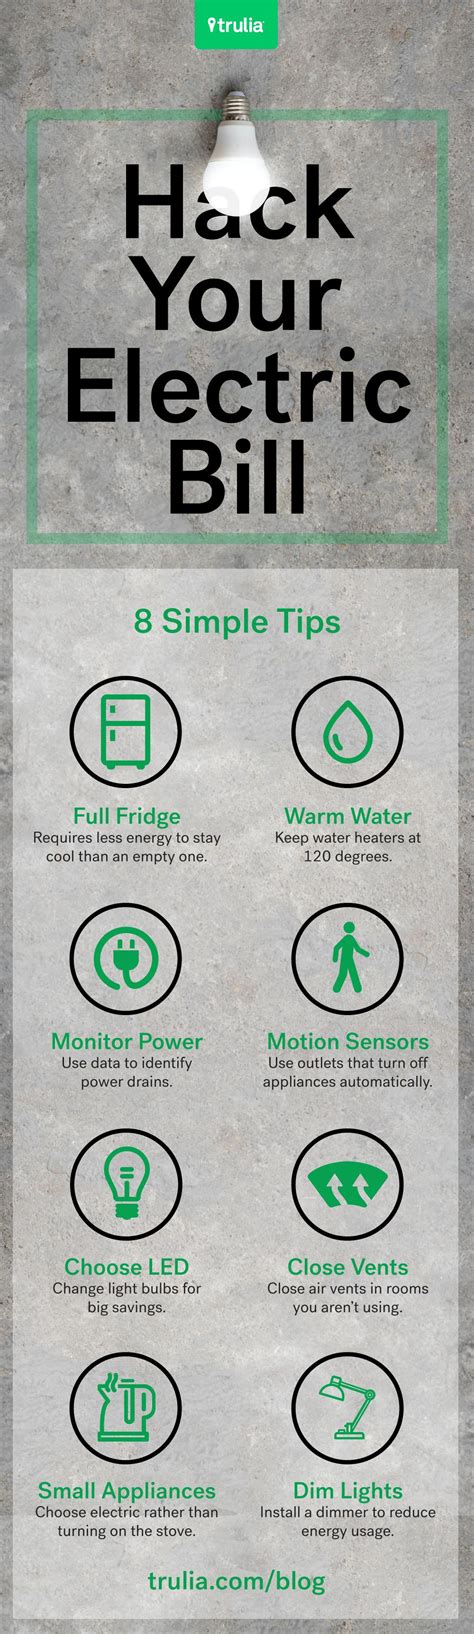 How To Save Electricity 9 Hacks Life At Home Trulia Blog Saving